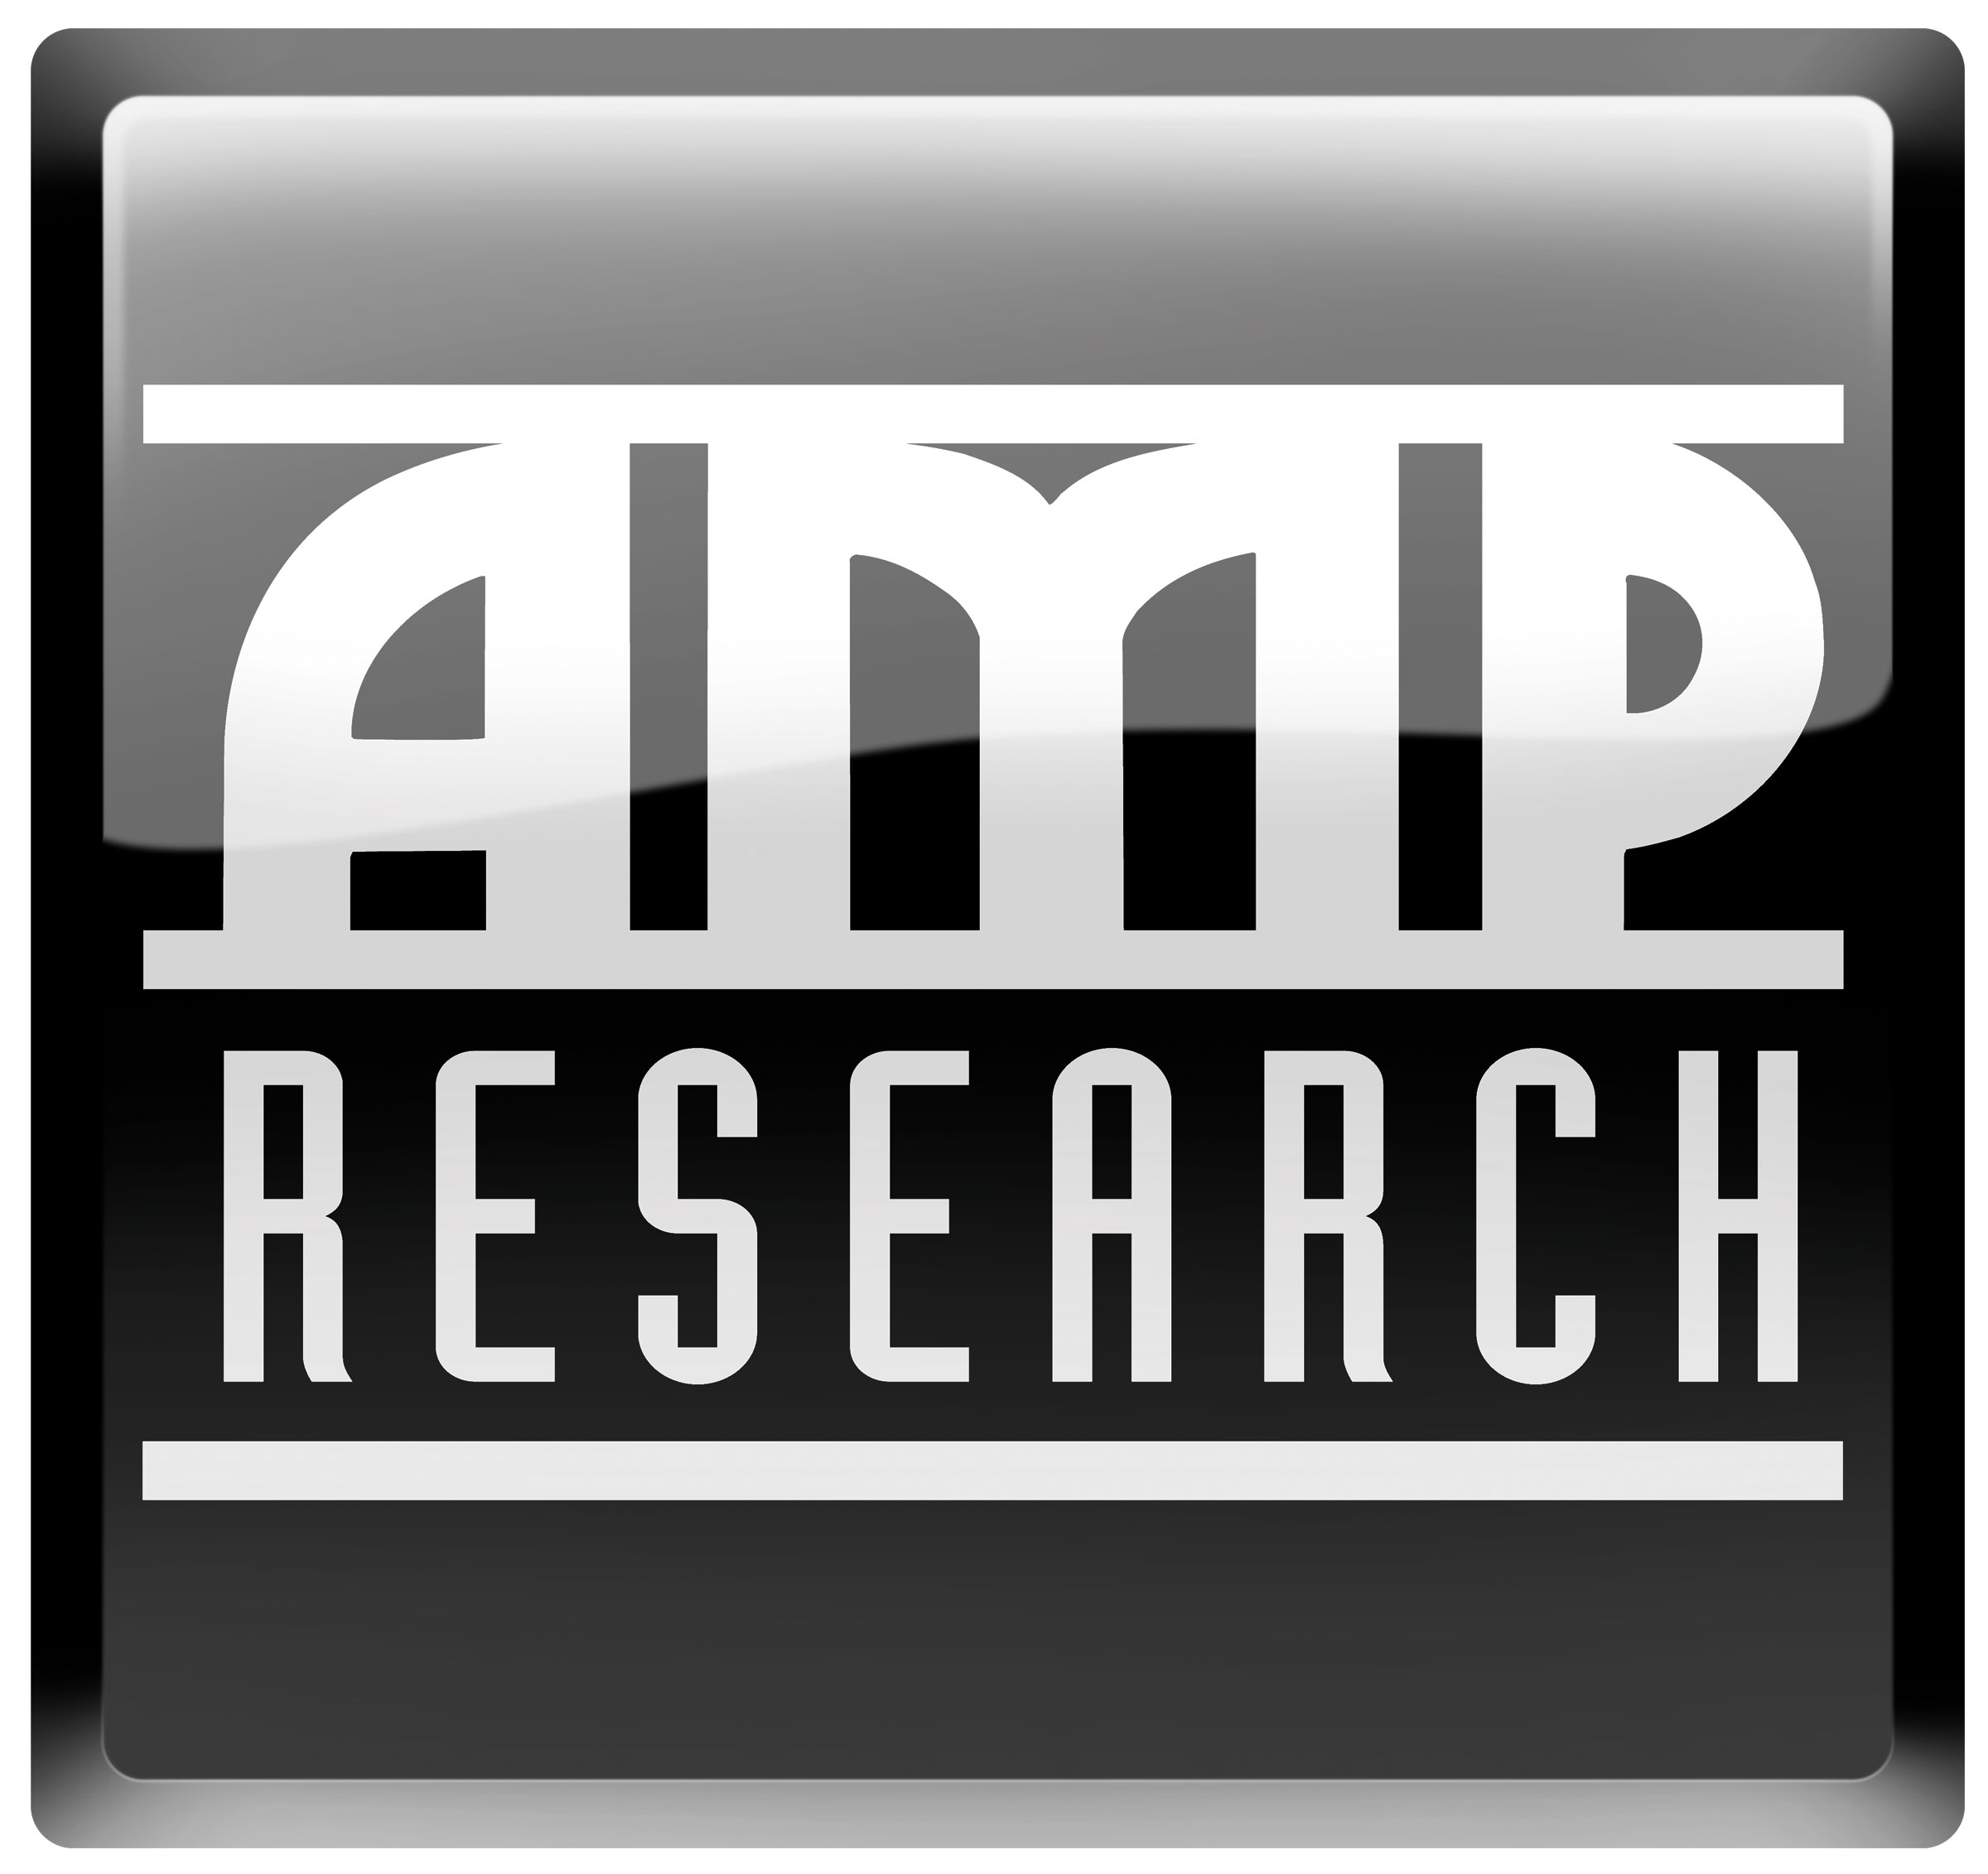 Amp Research supplier of amp steps, side bars, and quality truck accessories.